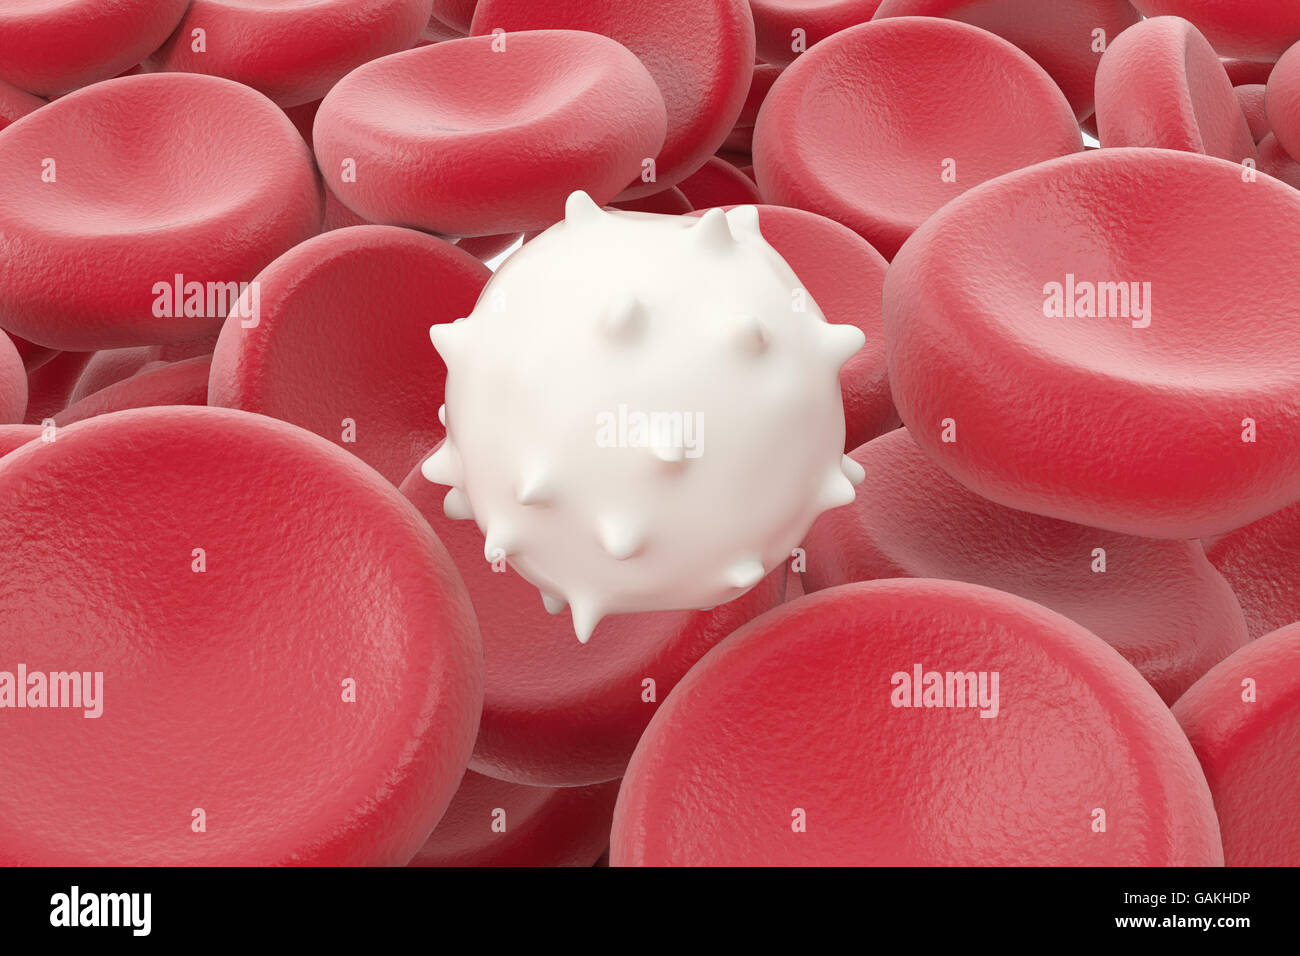 White blood cell medical or microbiological background. 3d illustration Stock Photo